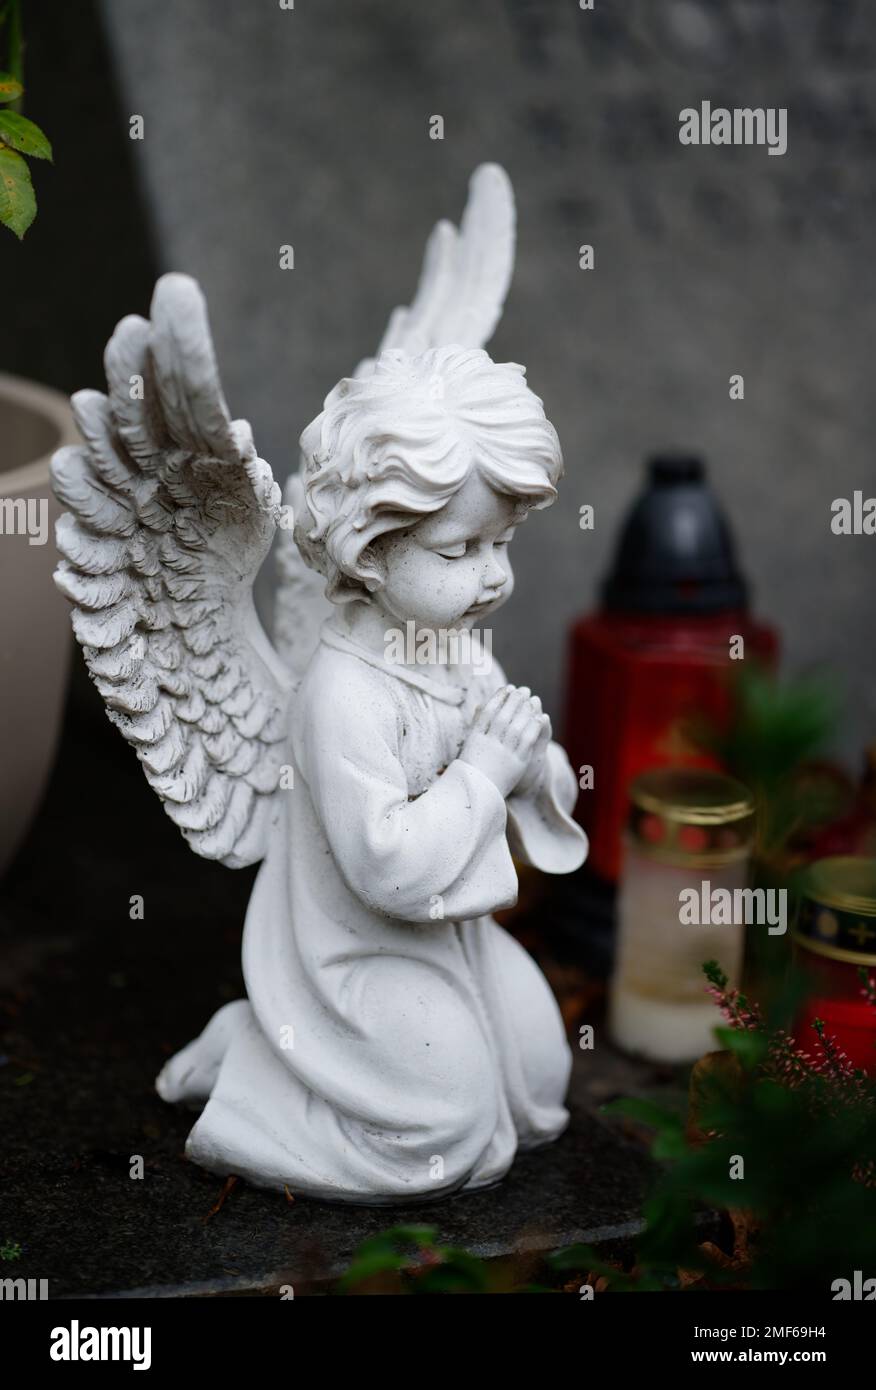 small white praying angel figure on a grave with grave candles in blurred background Stock Photo